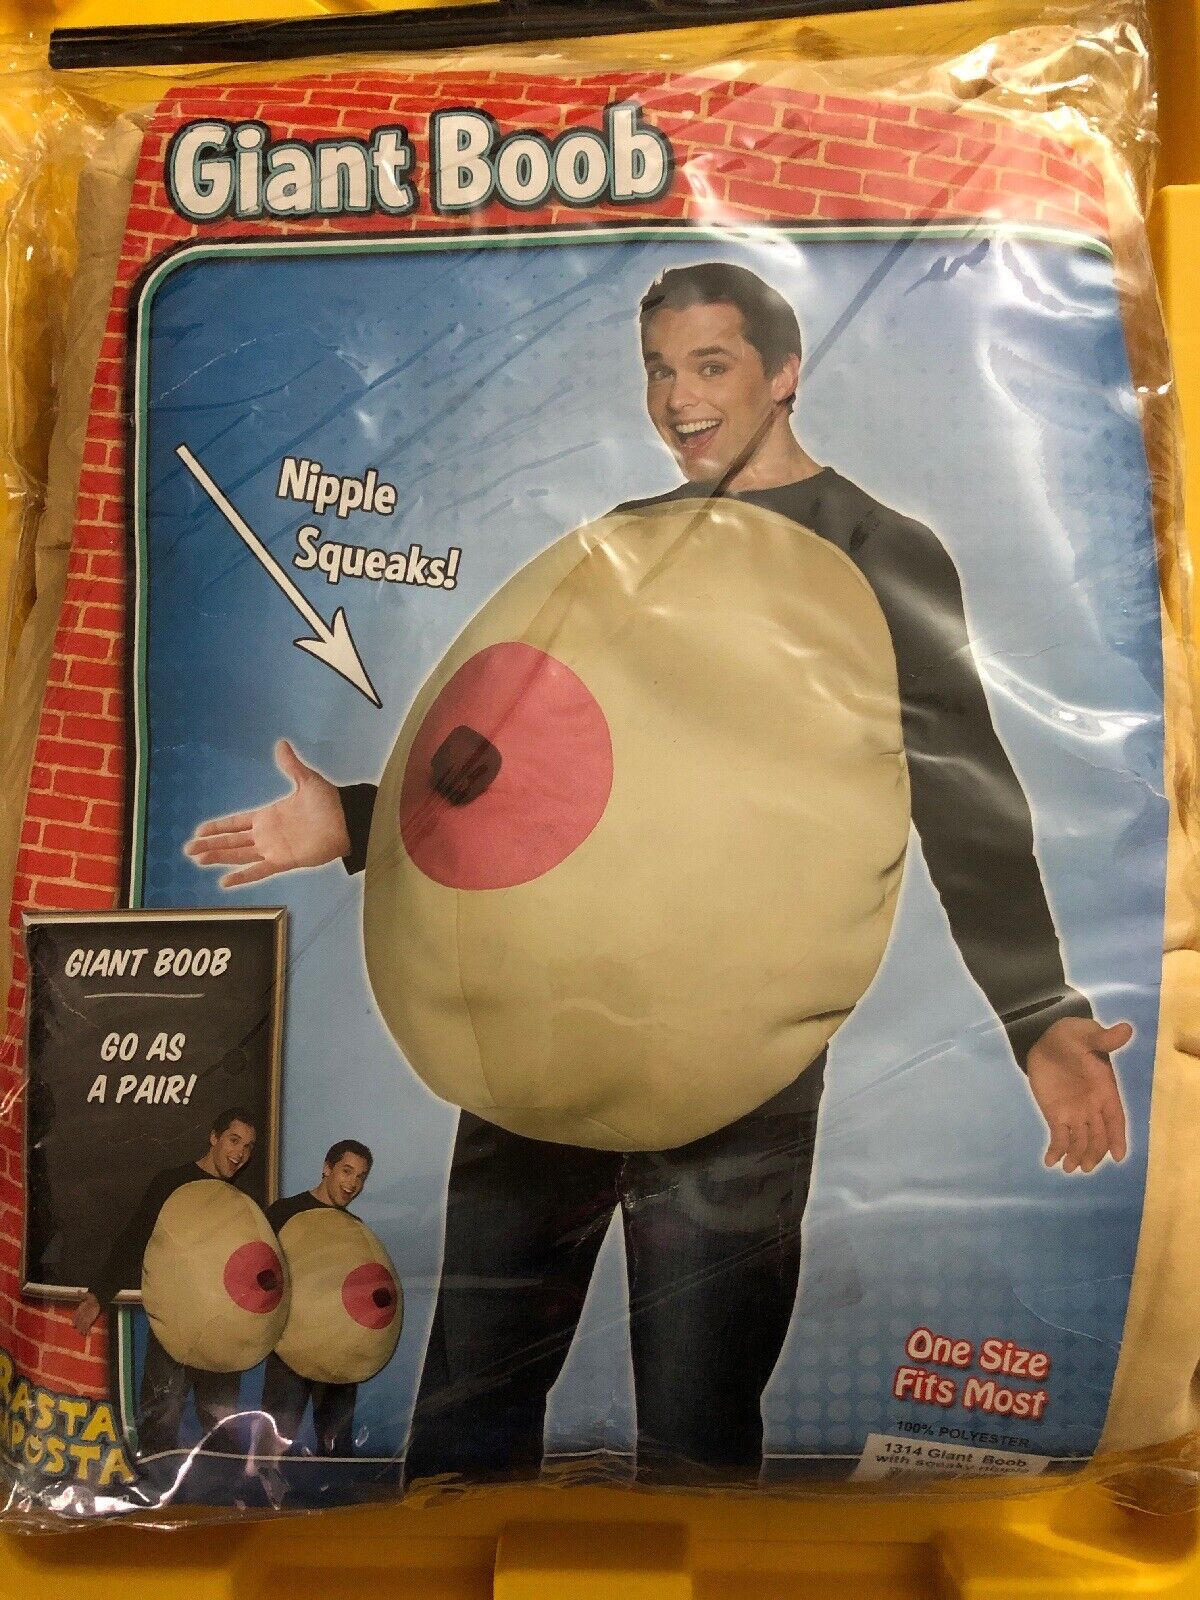 Funny halloween costume big boobs Rasta Imposta Giant Boob With Squeaky Nipple Costume Adult One Size For Men And Women Adult Sized Silly Funny Humorous Costume Dress Outfit For Halloween Events R Rated X Rated College Humor Over 21